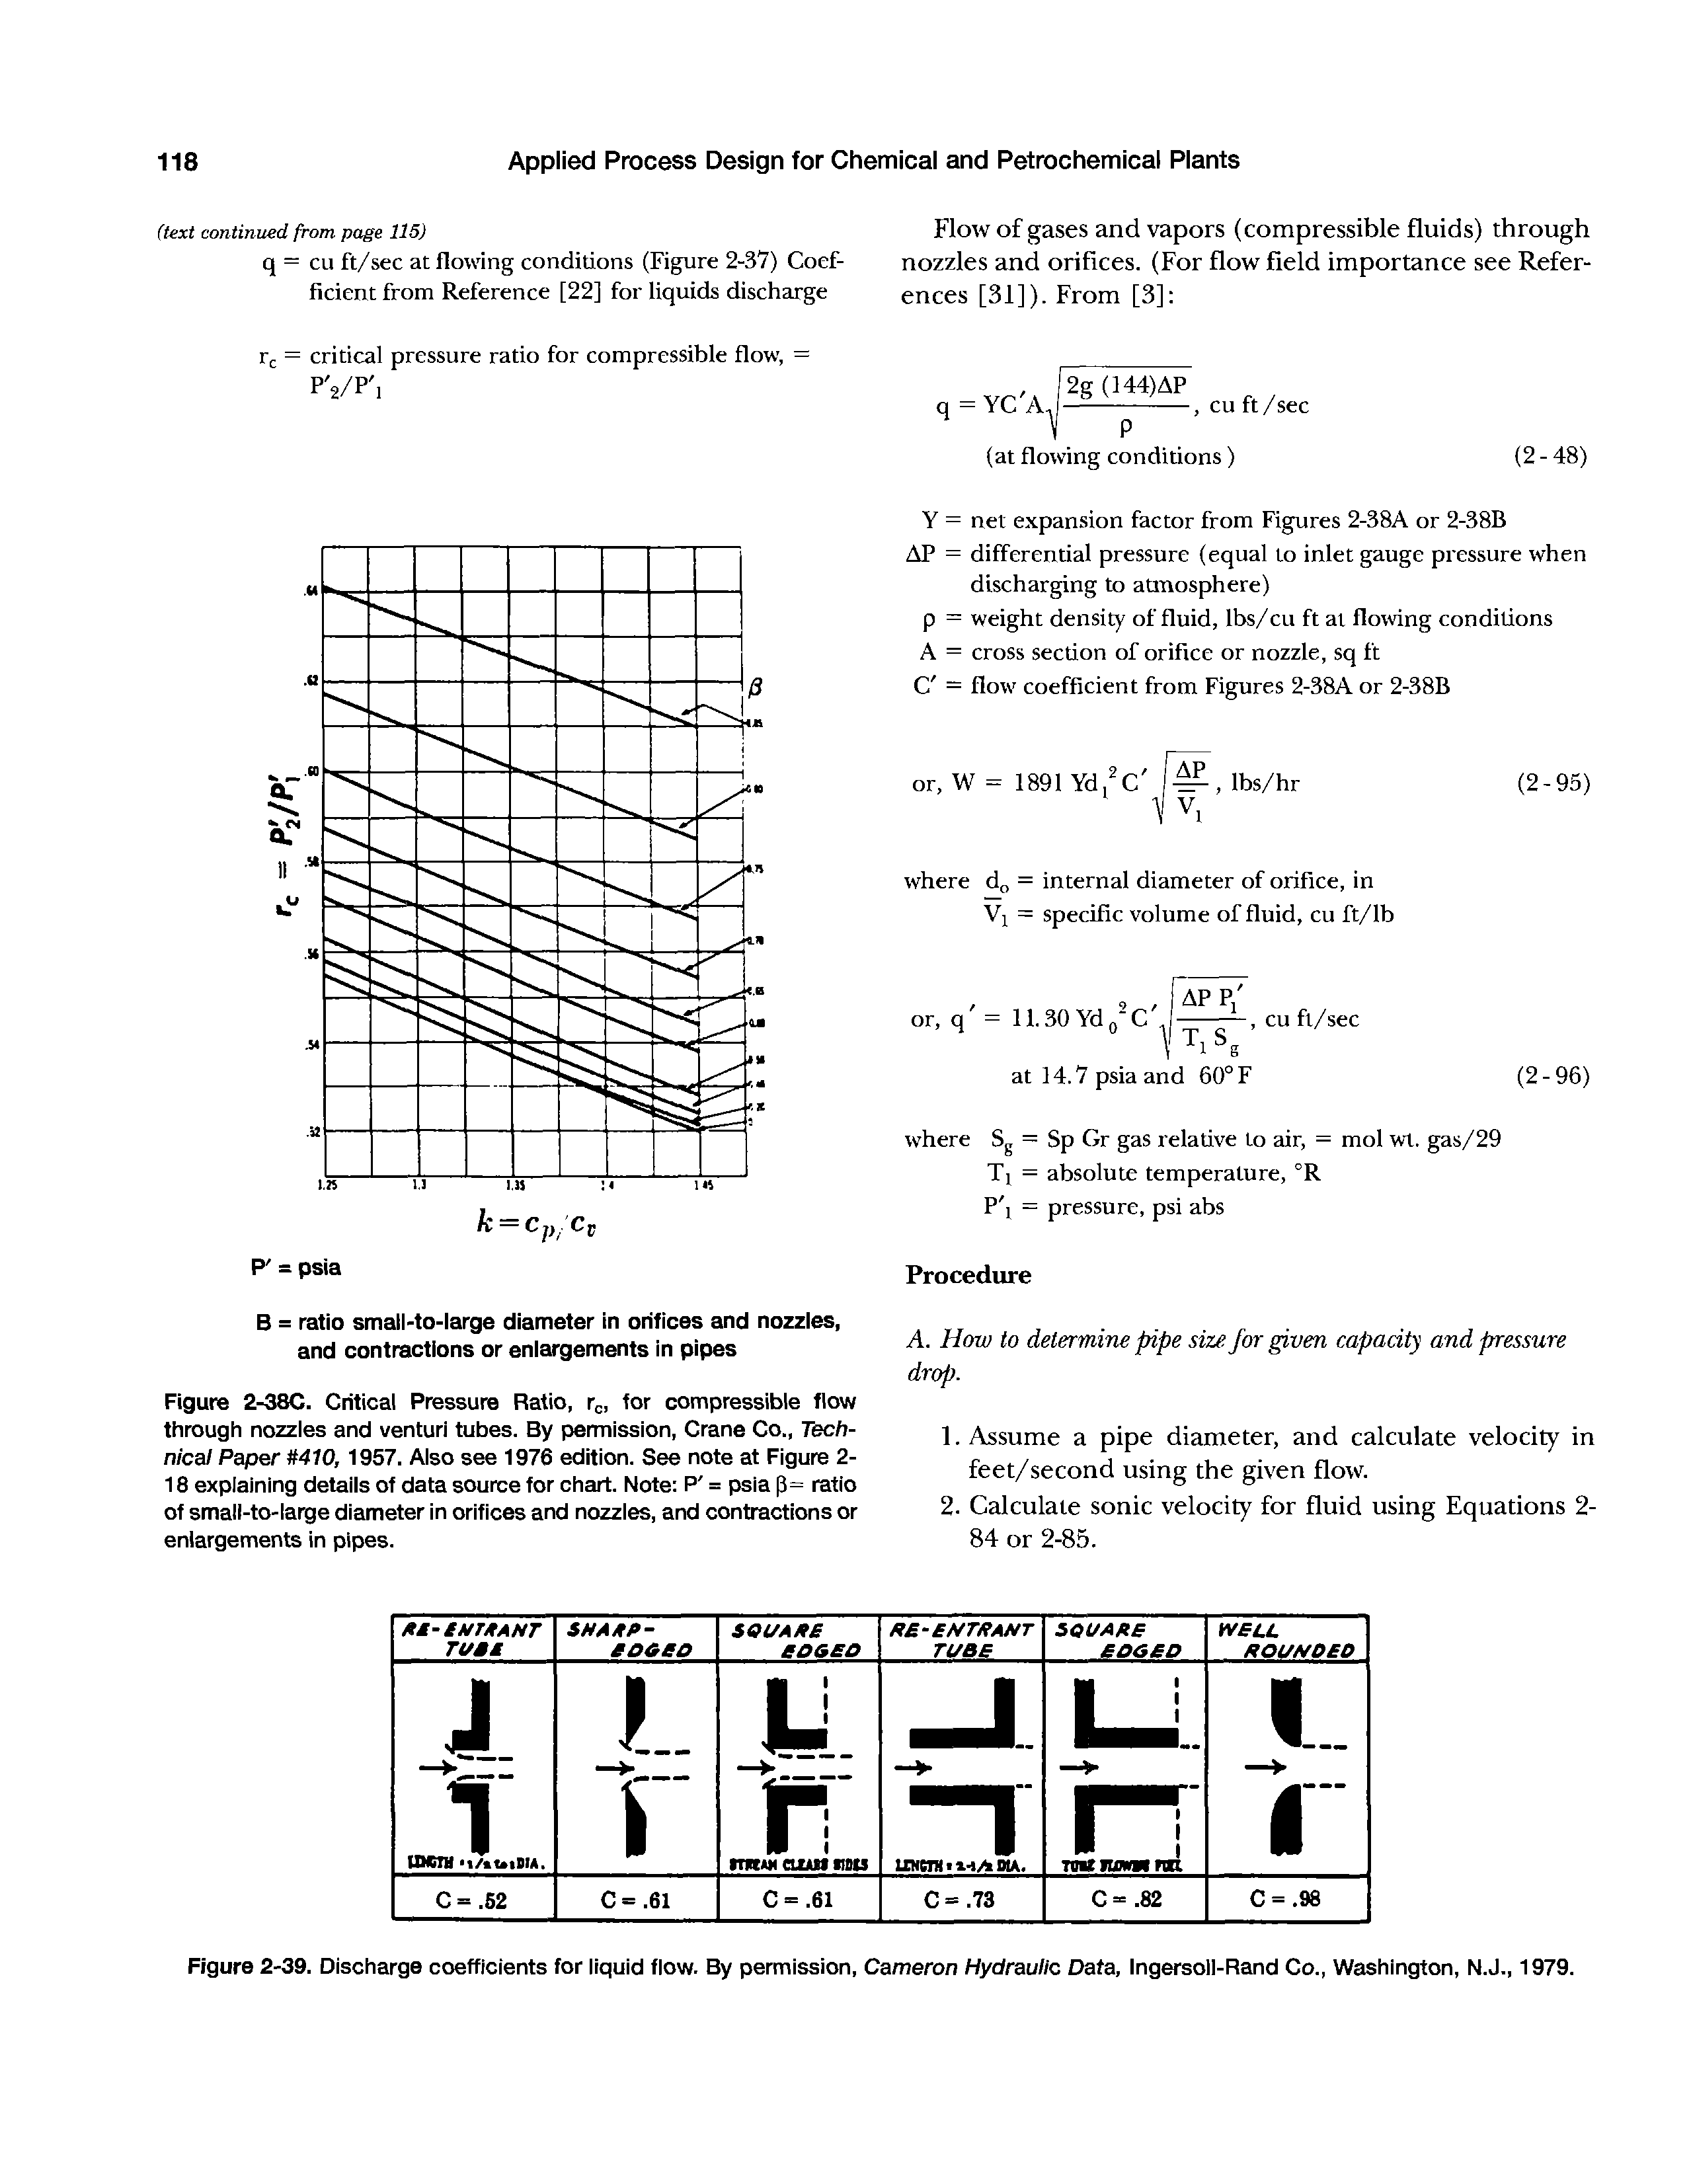 Figure 2-38C. Critical Pressure Ratio, r, for compressible flow through nozzles and venturi tubes. By permission, Crane Co., Technical Paper 410, 1957. Also see 1976 edition. See note at Figure 2-18 explaining details of data source for chart. Note P = psia p= ratio of small-to-large diameter in orifices and nozzles, and contractions or enlargements in pipes.